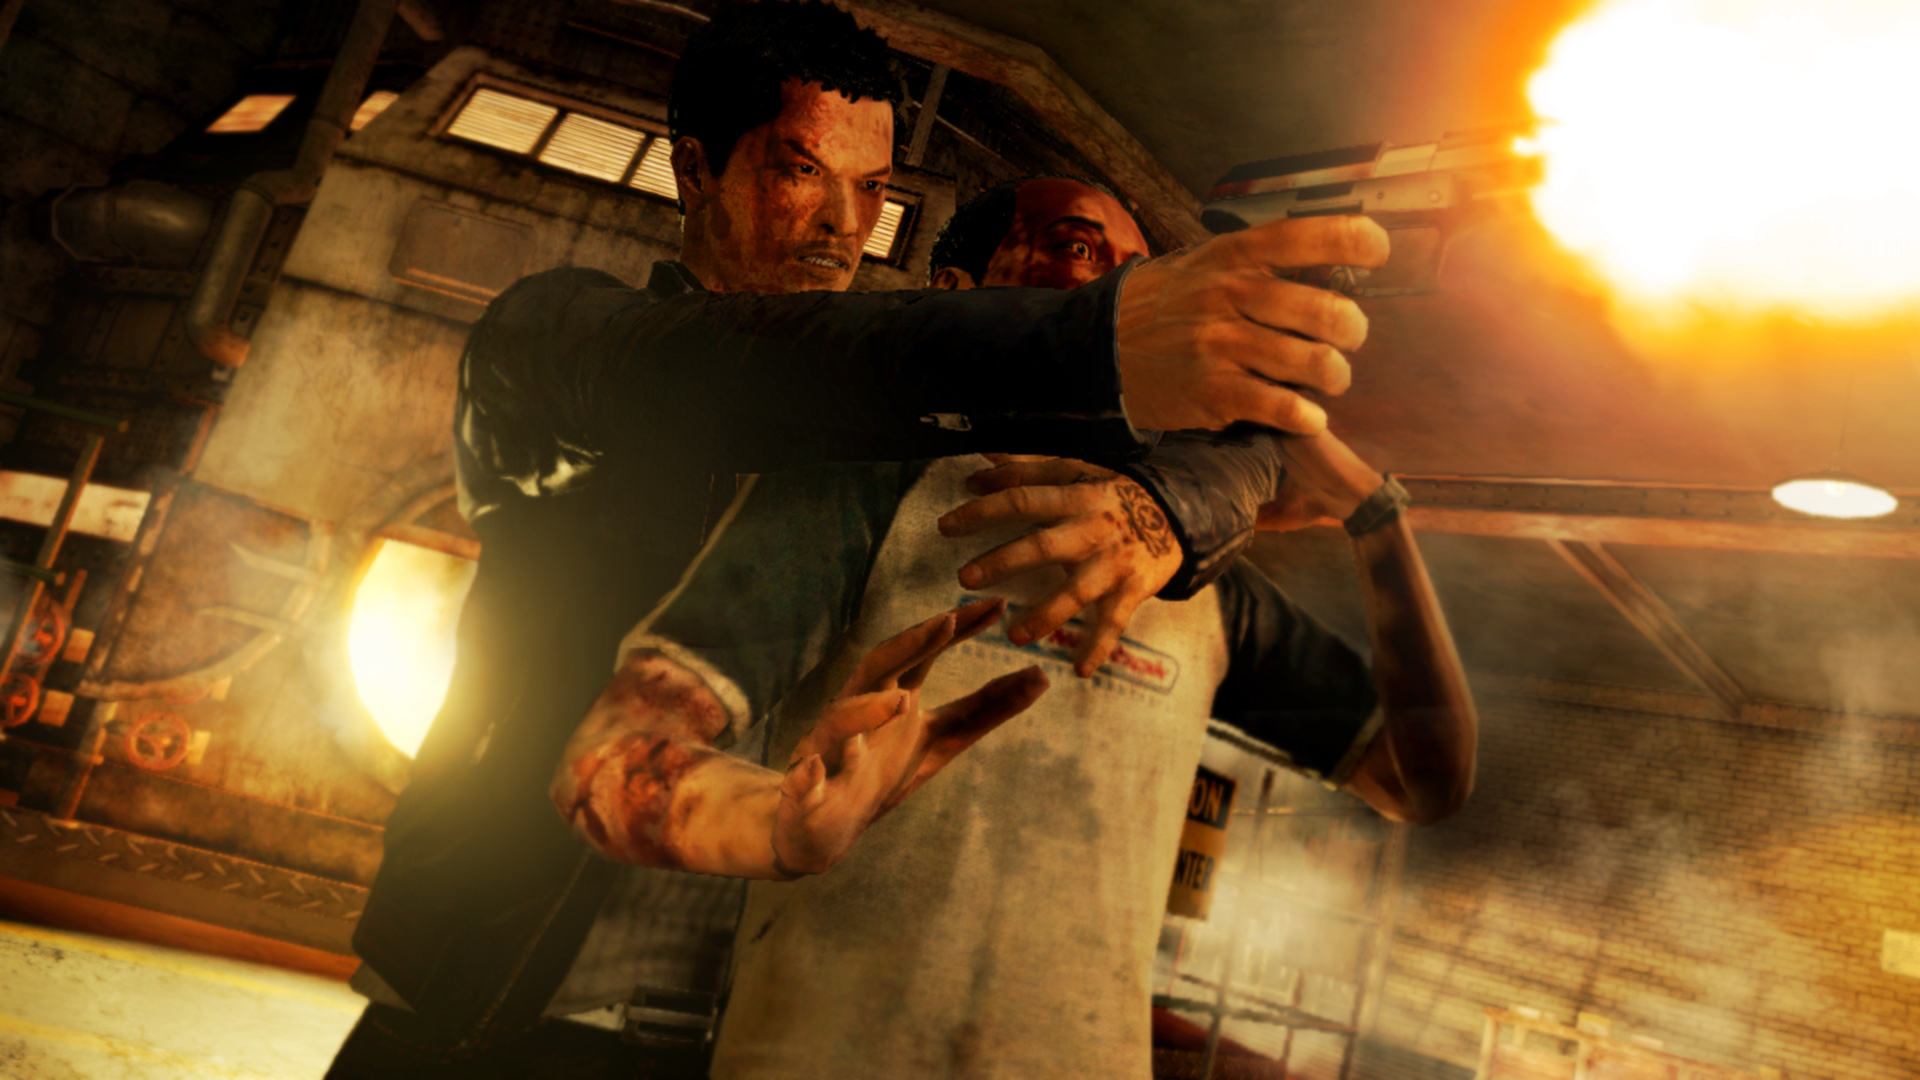 sleeping dogs review